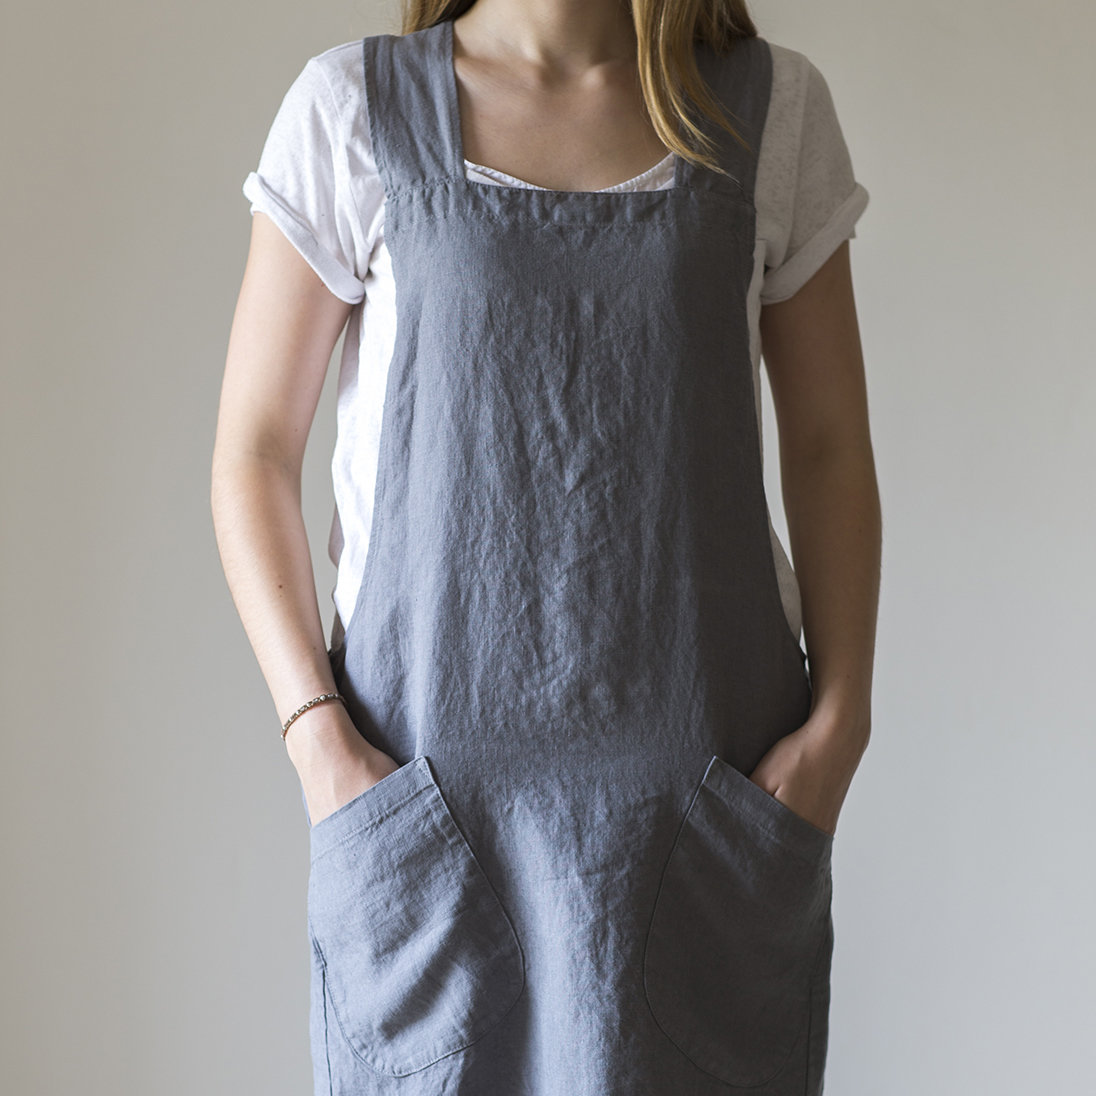 The Stuff of Life: The Linen Works | The Simple Things